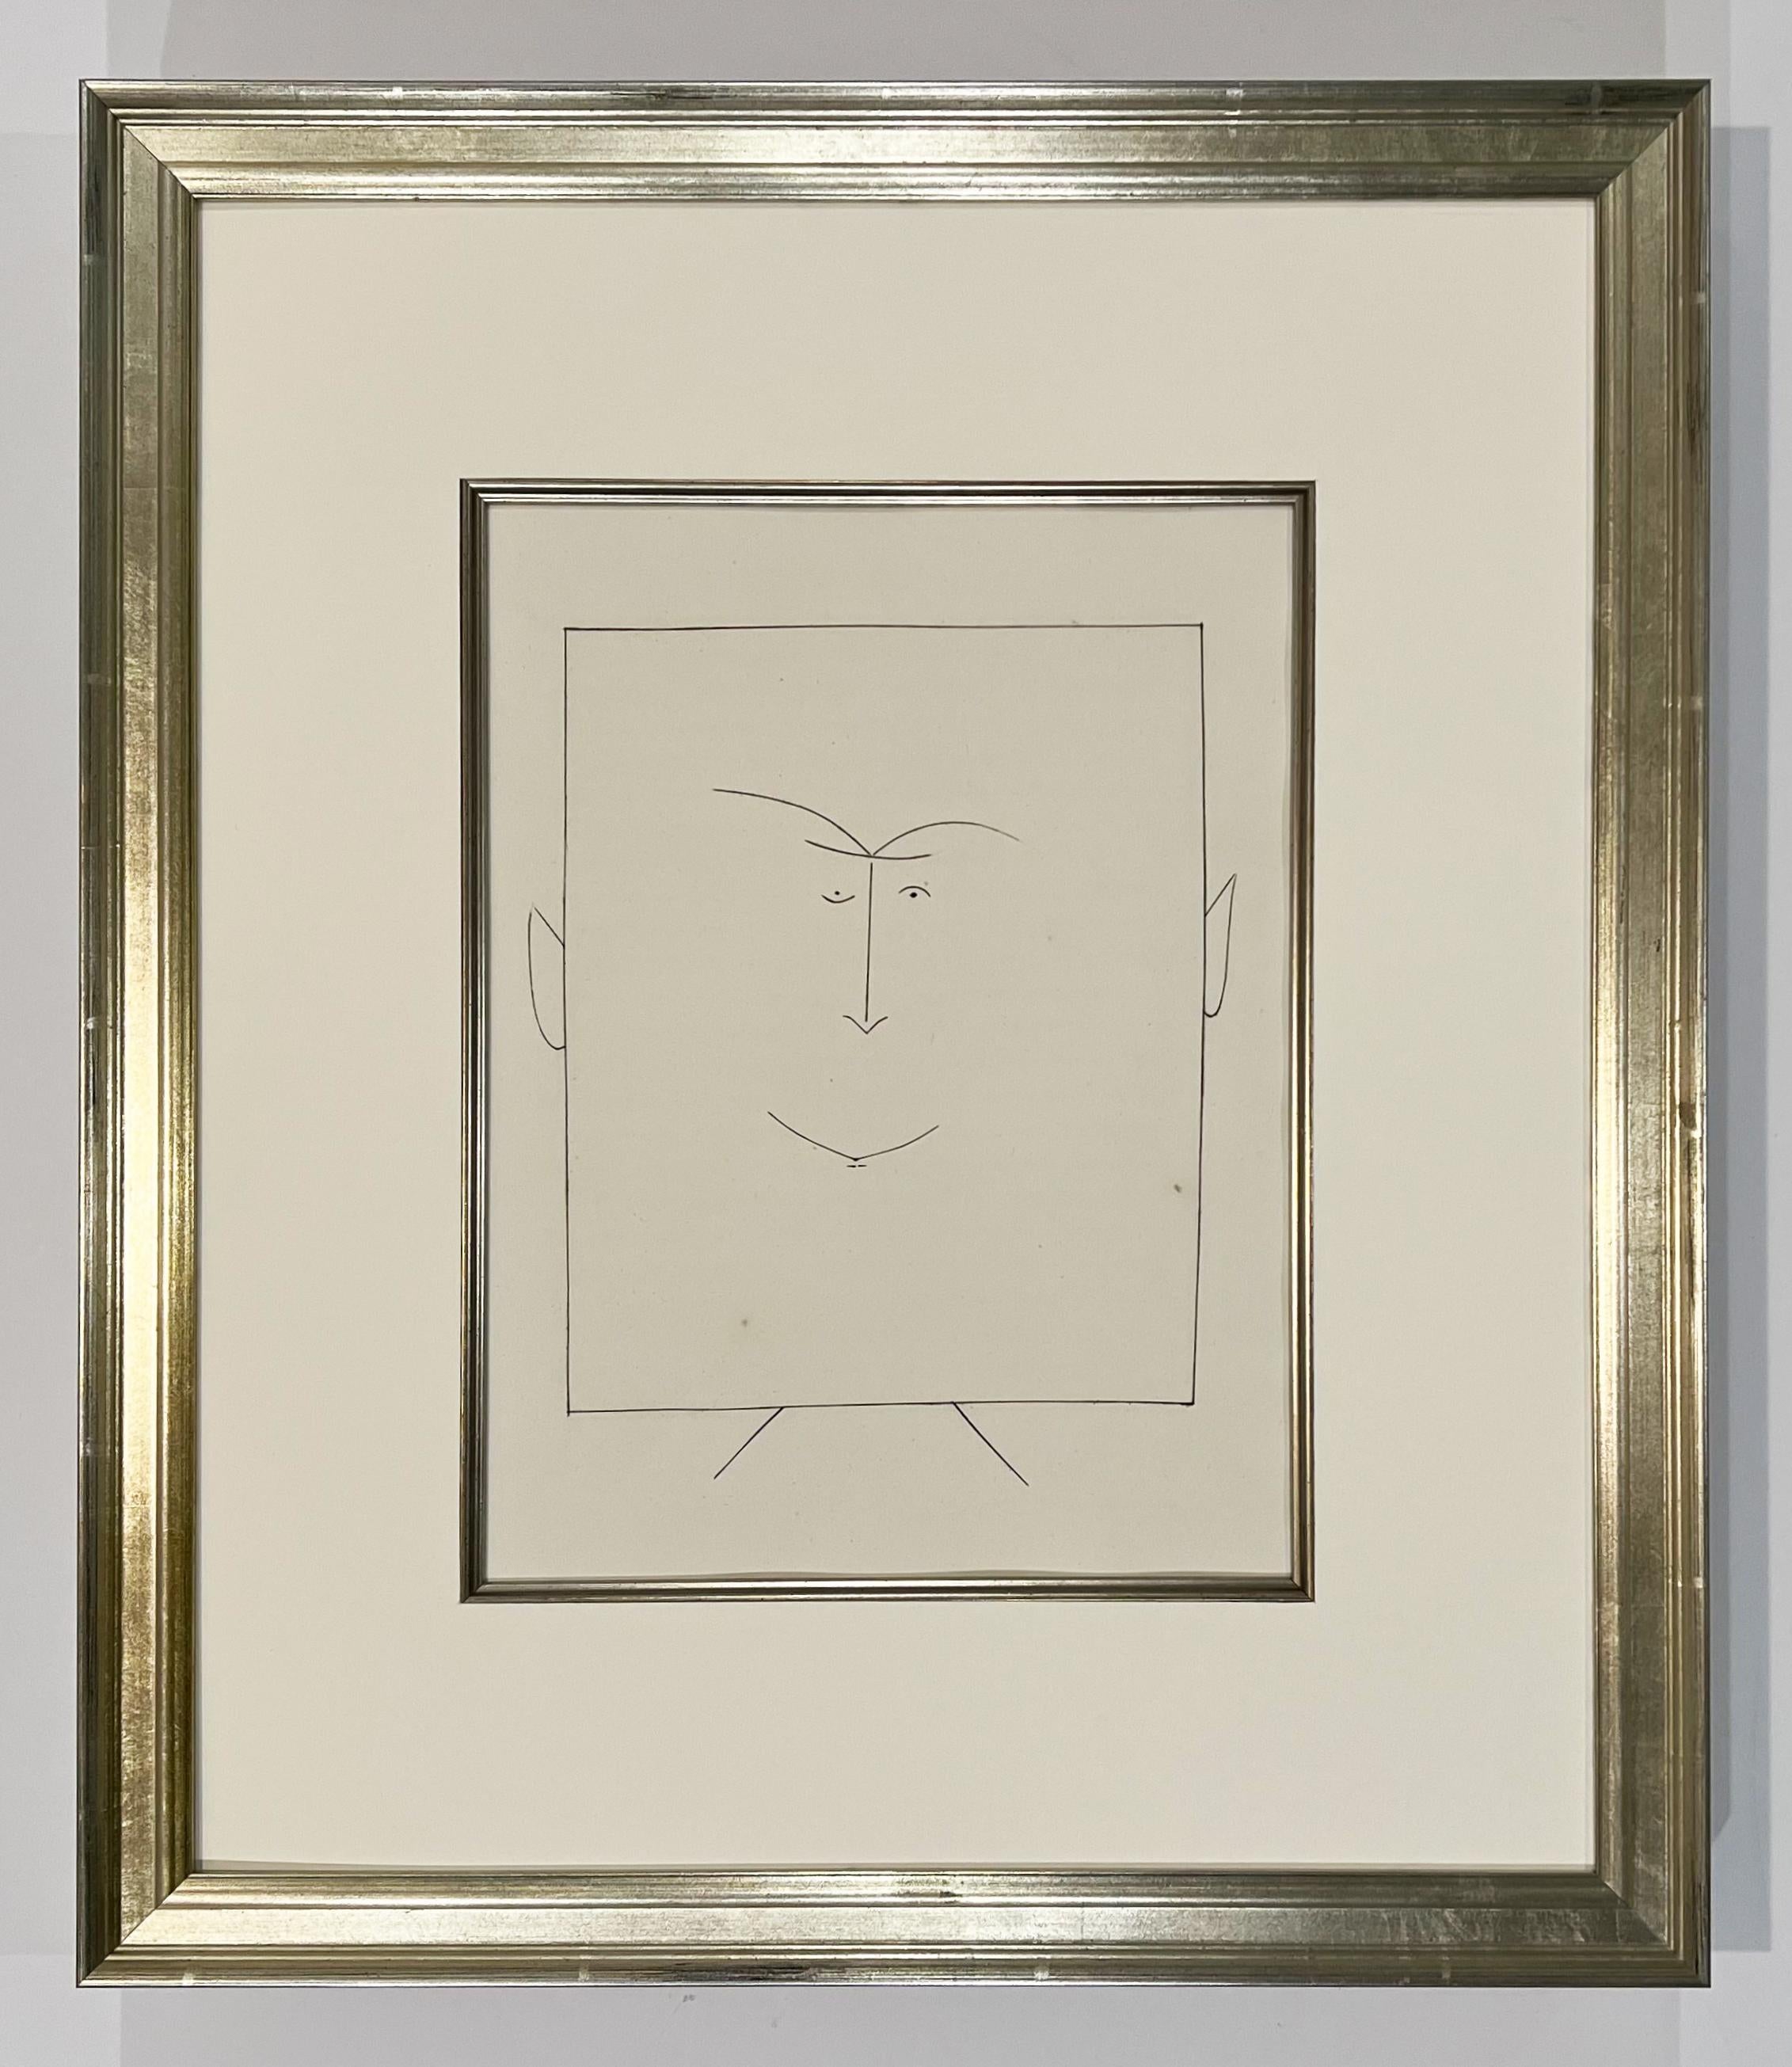 Square Head of a Man with Ears (Plate III), from Carmen - Print by Pablo Picasso